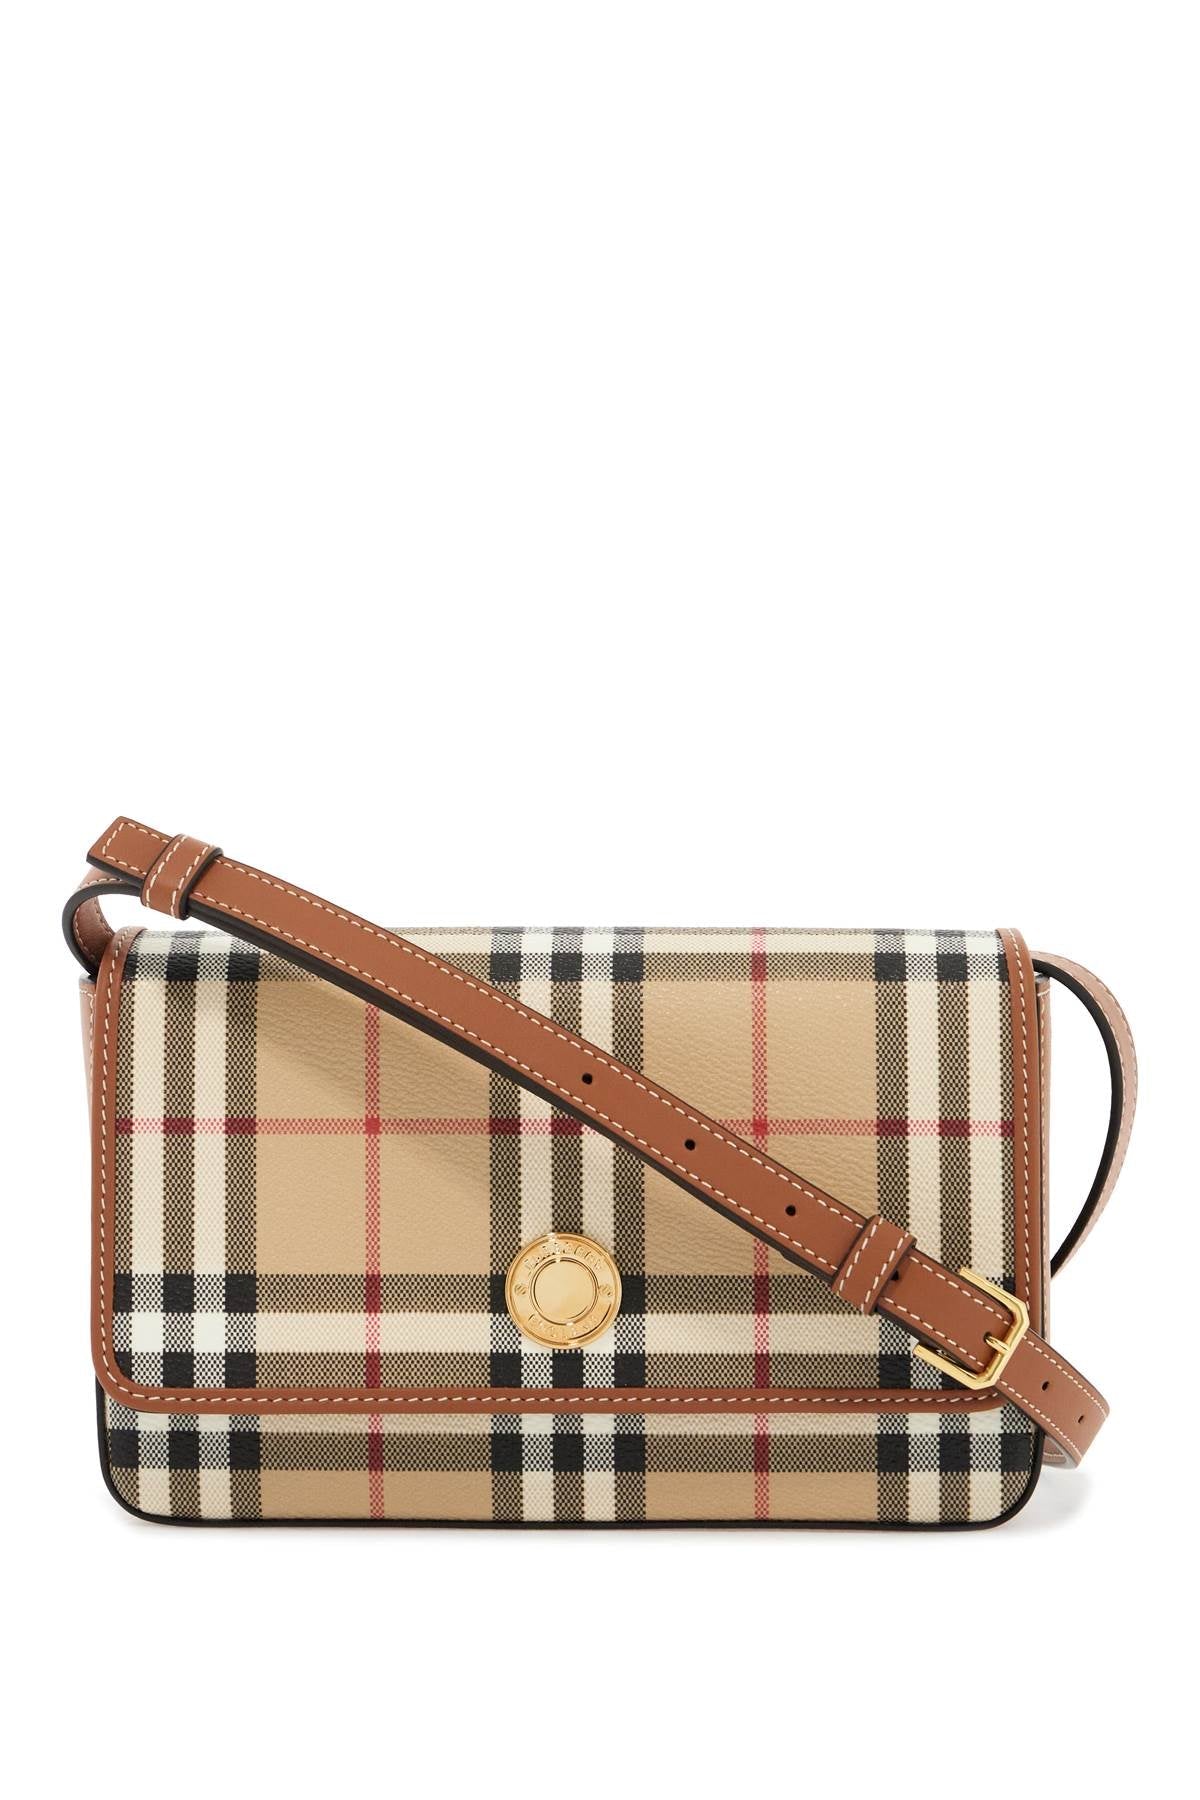 Burberry "checkered shoulder bag with strap - Beige